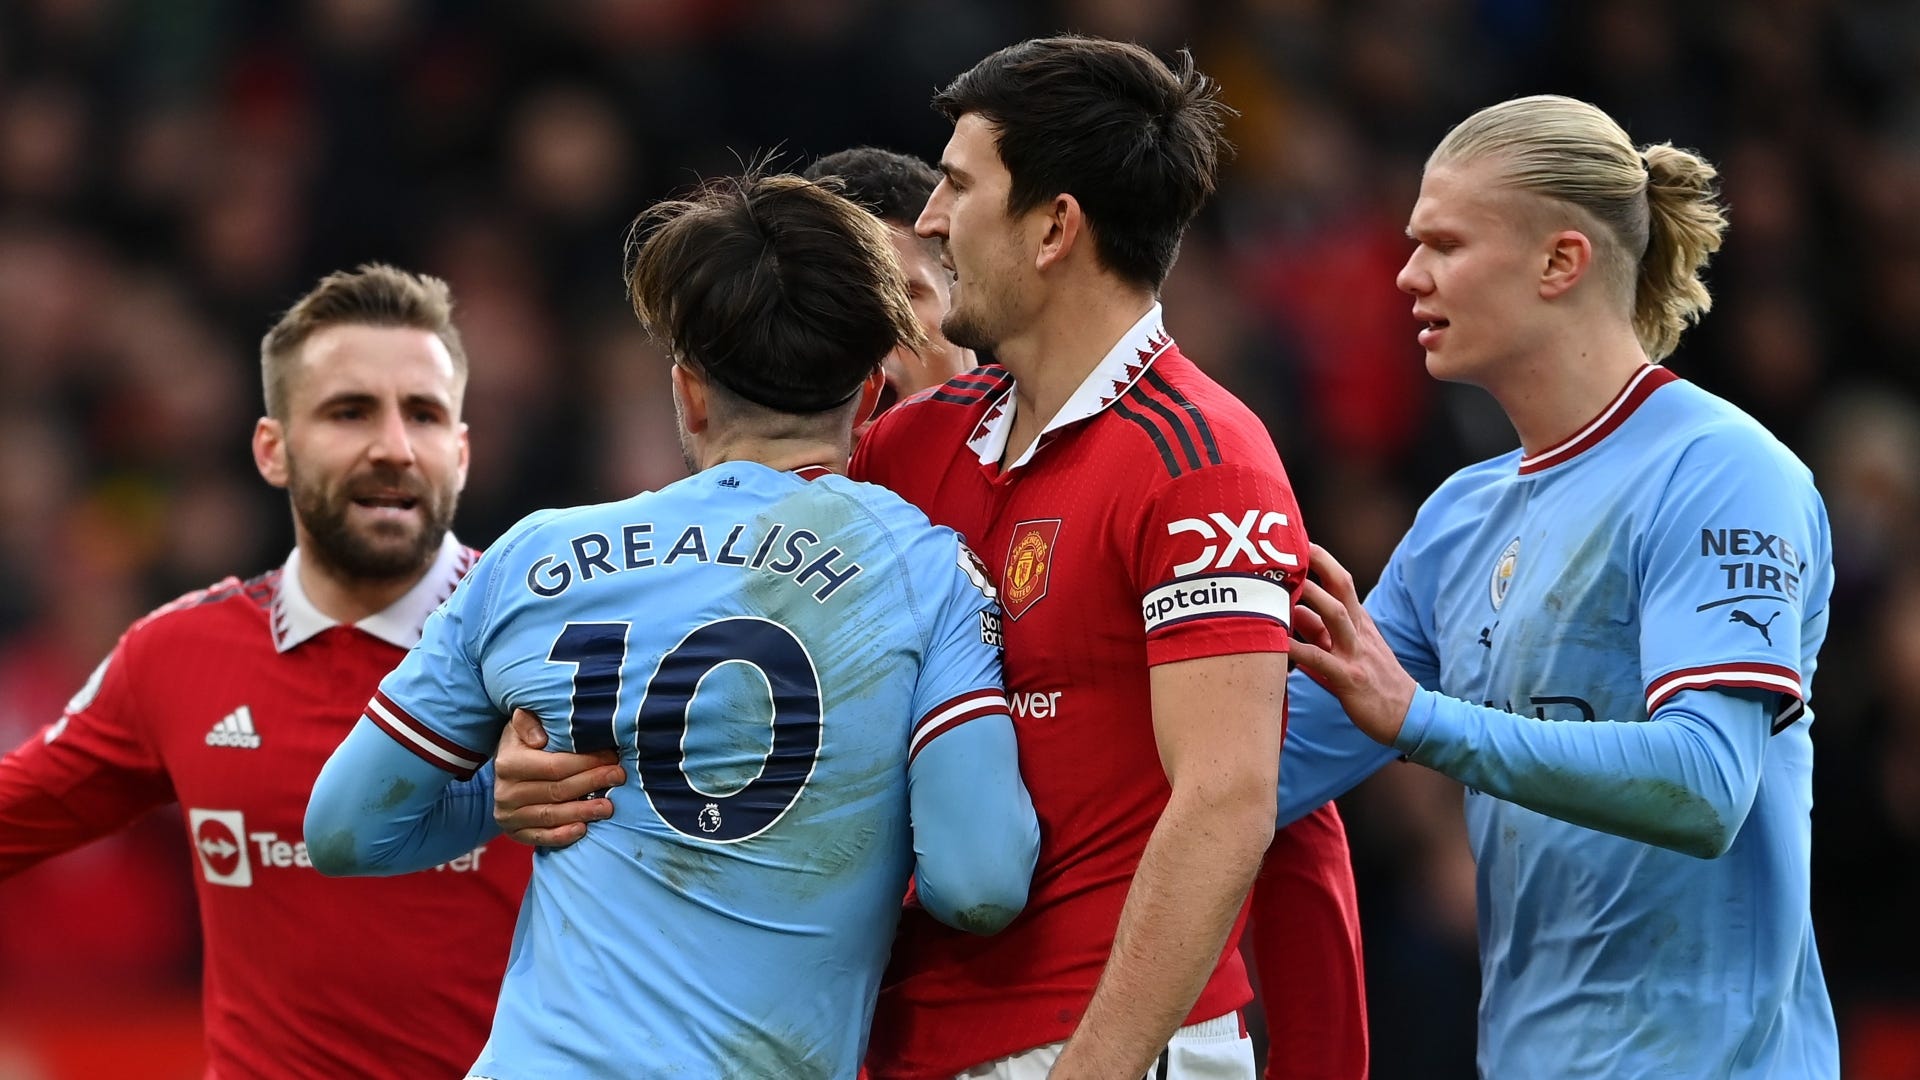 Manchester United vs Manchester City Live stream, TV channel, kick-off time and where to watch Goal UK